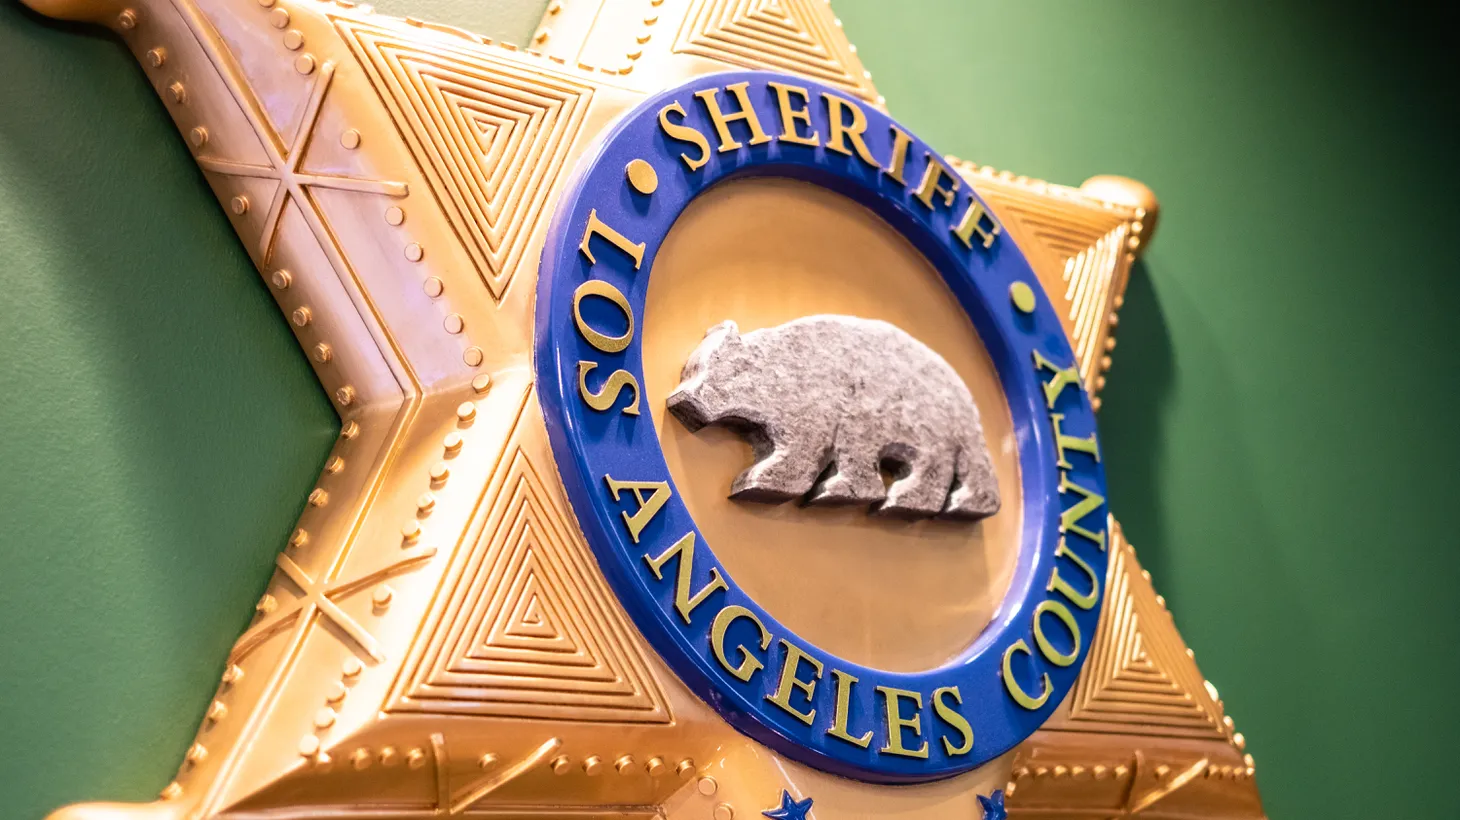 Within the LA County Sheriff’s Department, more than 40 deputies are members of gang-like cliques, according to Inspector General Max Huntsman.